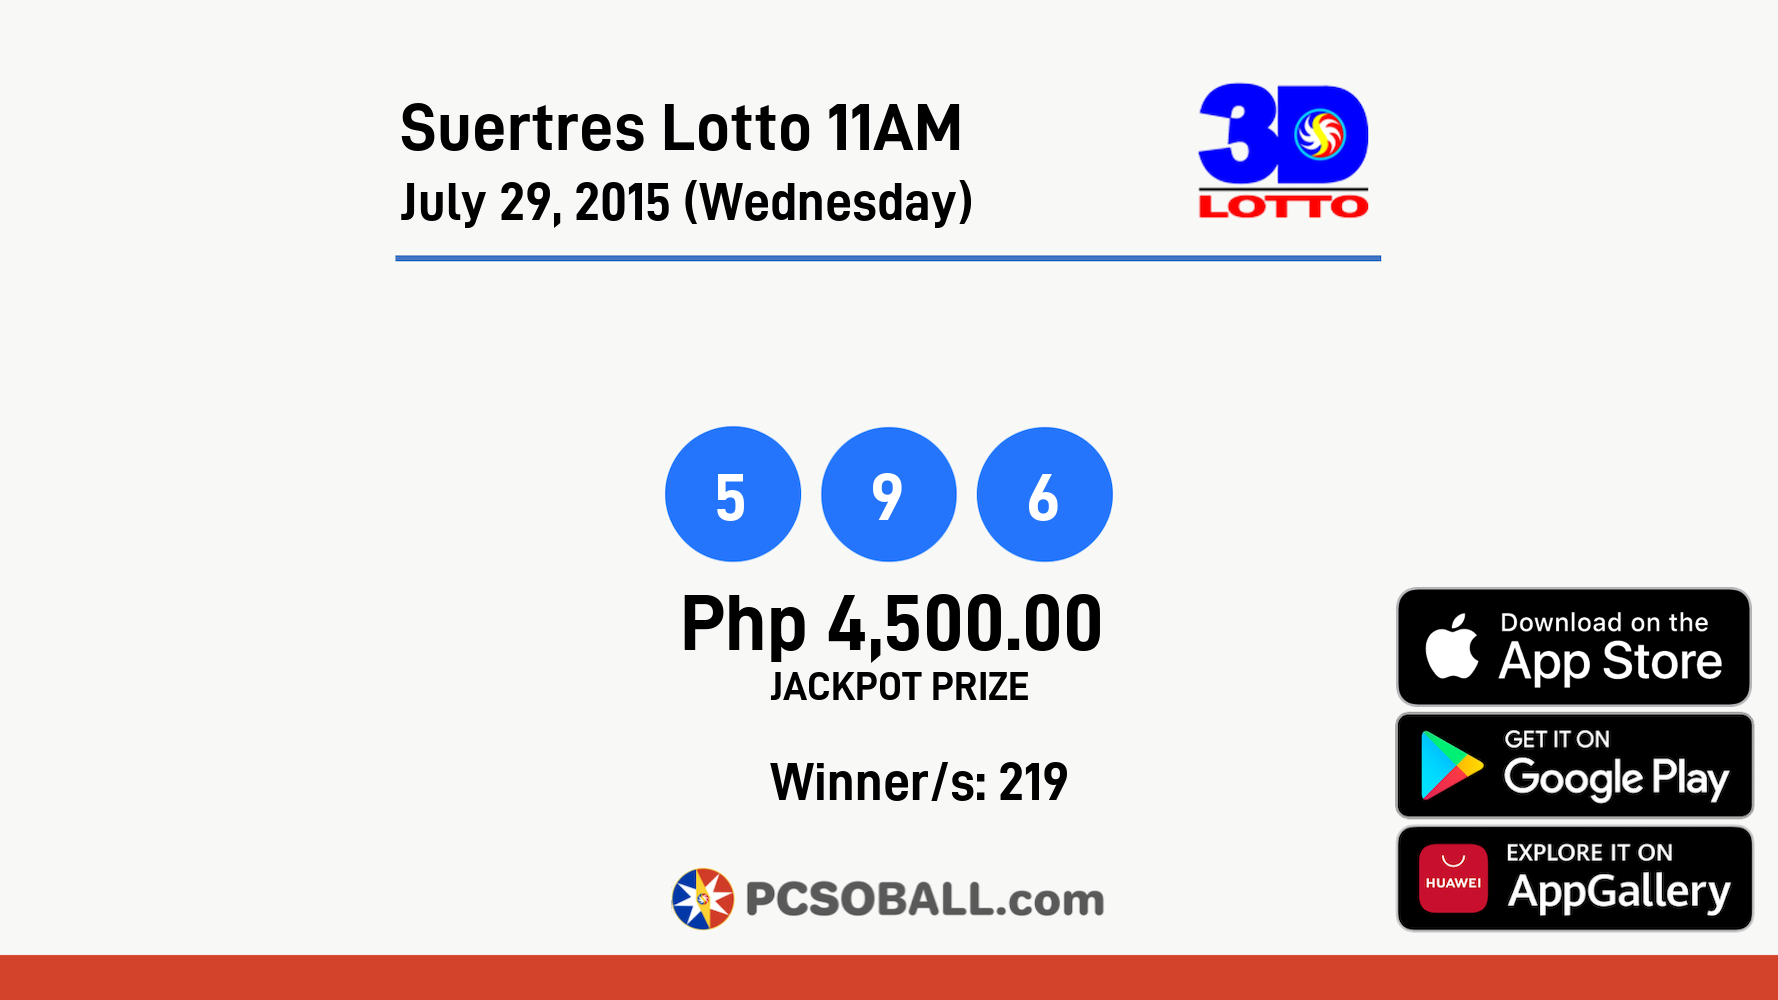 Suertres Lotto 11AM July 29, 2015 (Wednesday) Result